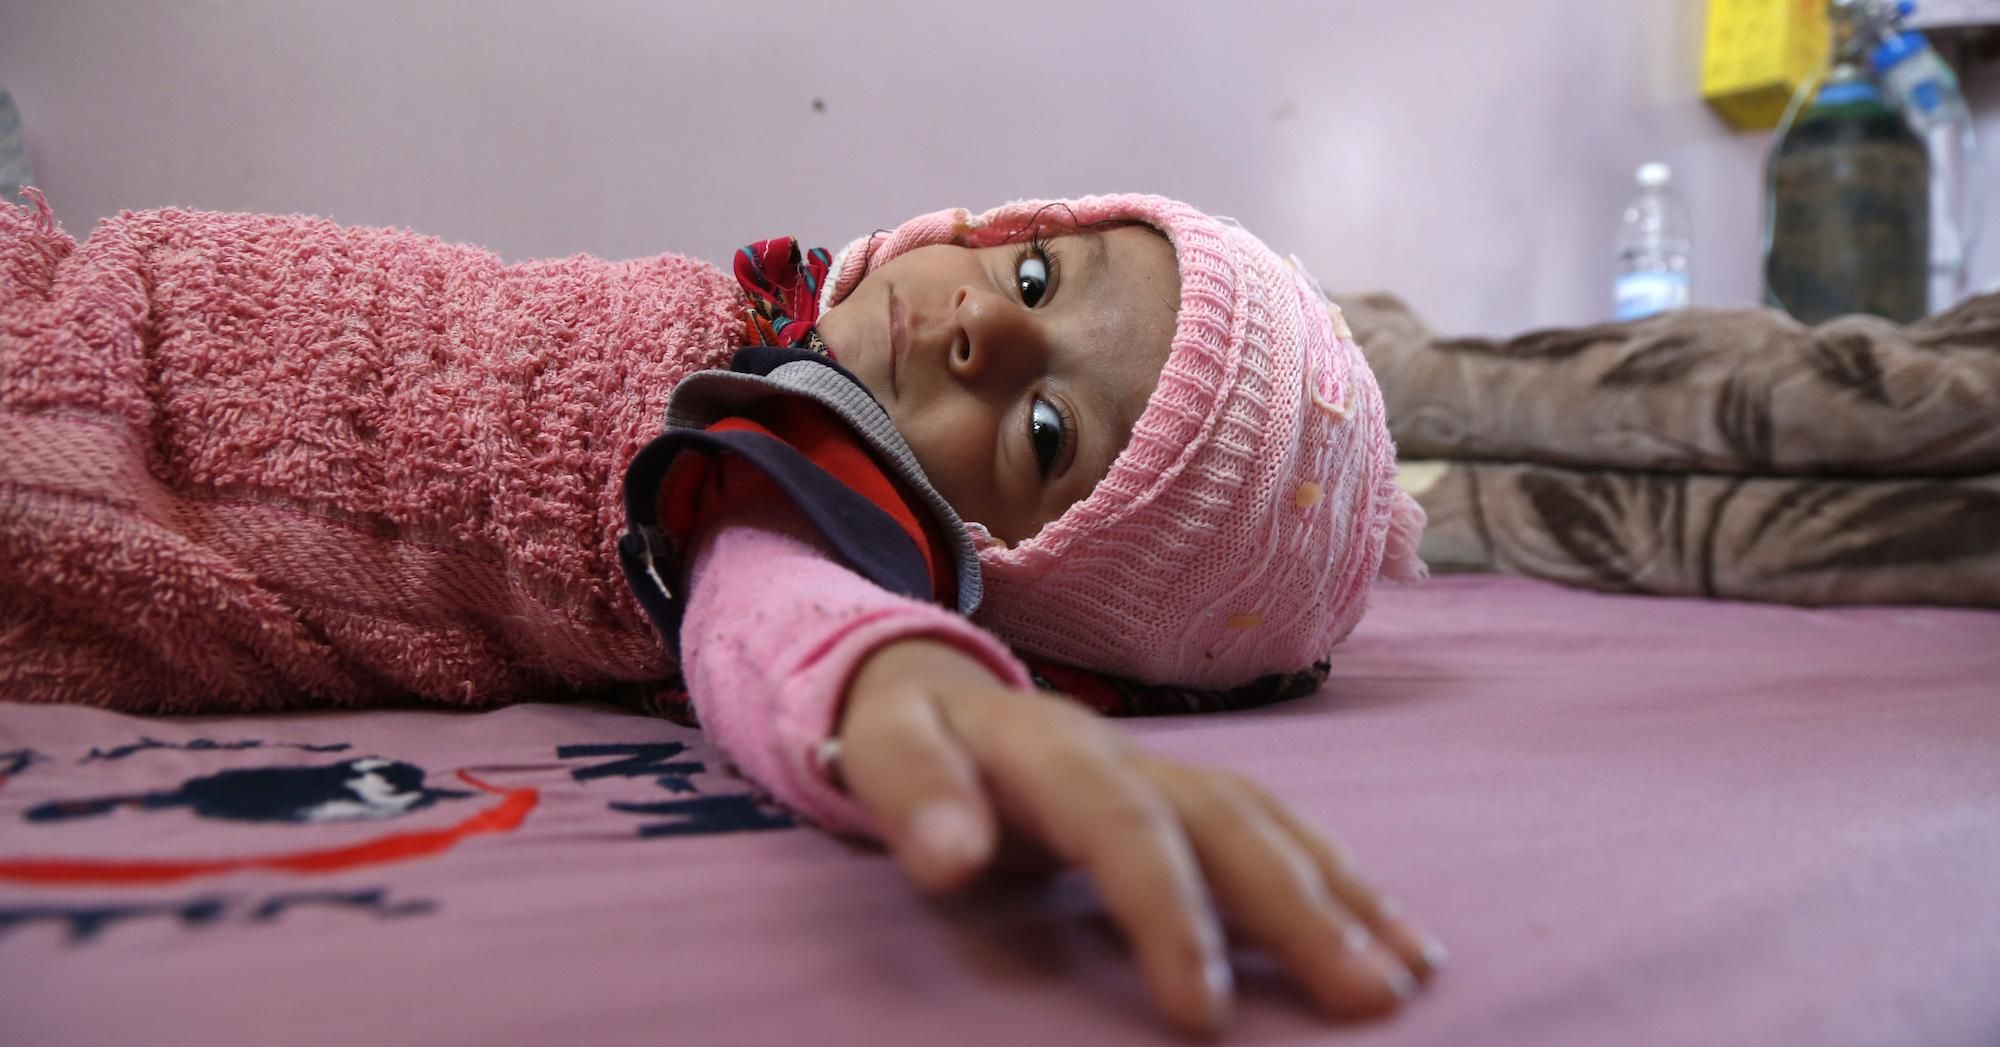 A Yemeni malnourished child lies on a bed where he receives treatment at the malnutrition treating department in Al-Sabeen hospital on January 26, 2021 in Sana'a, Yemen.